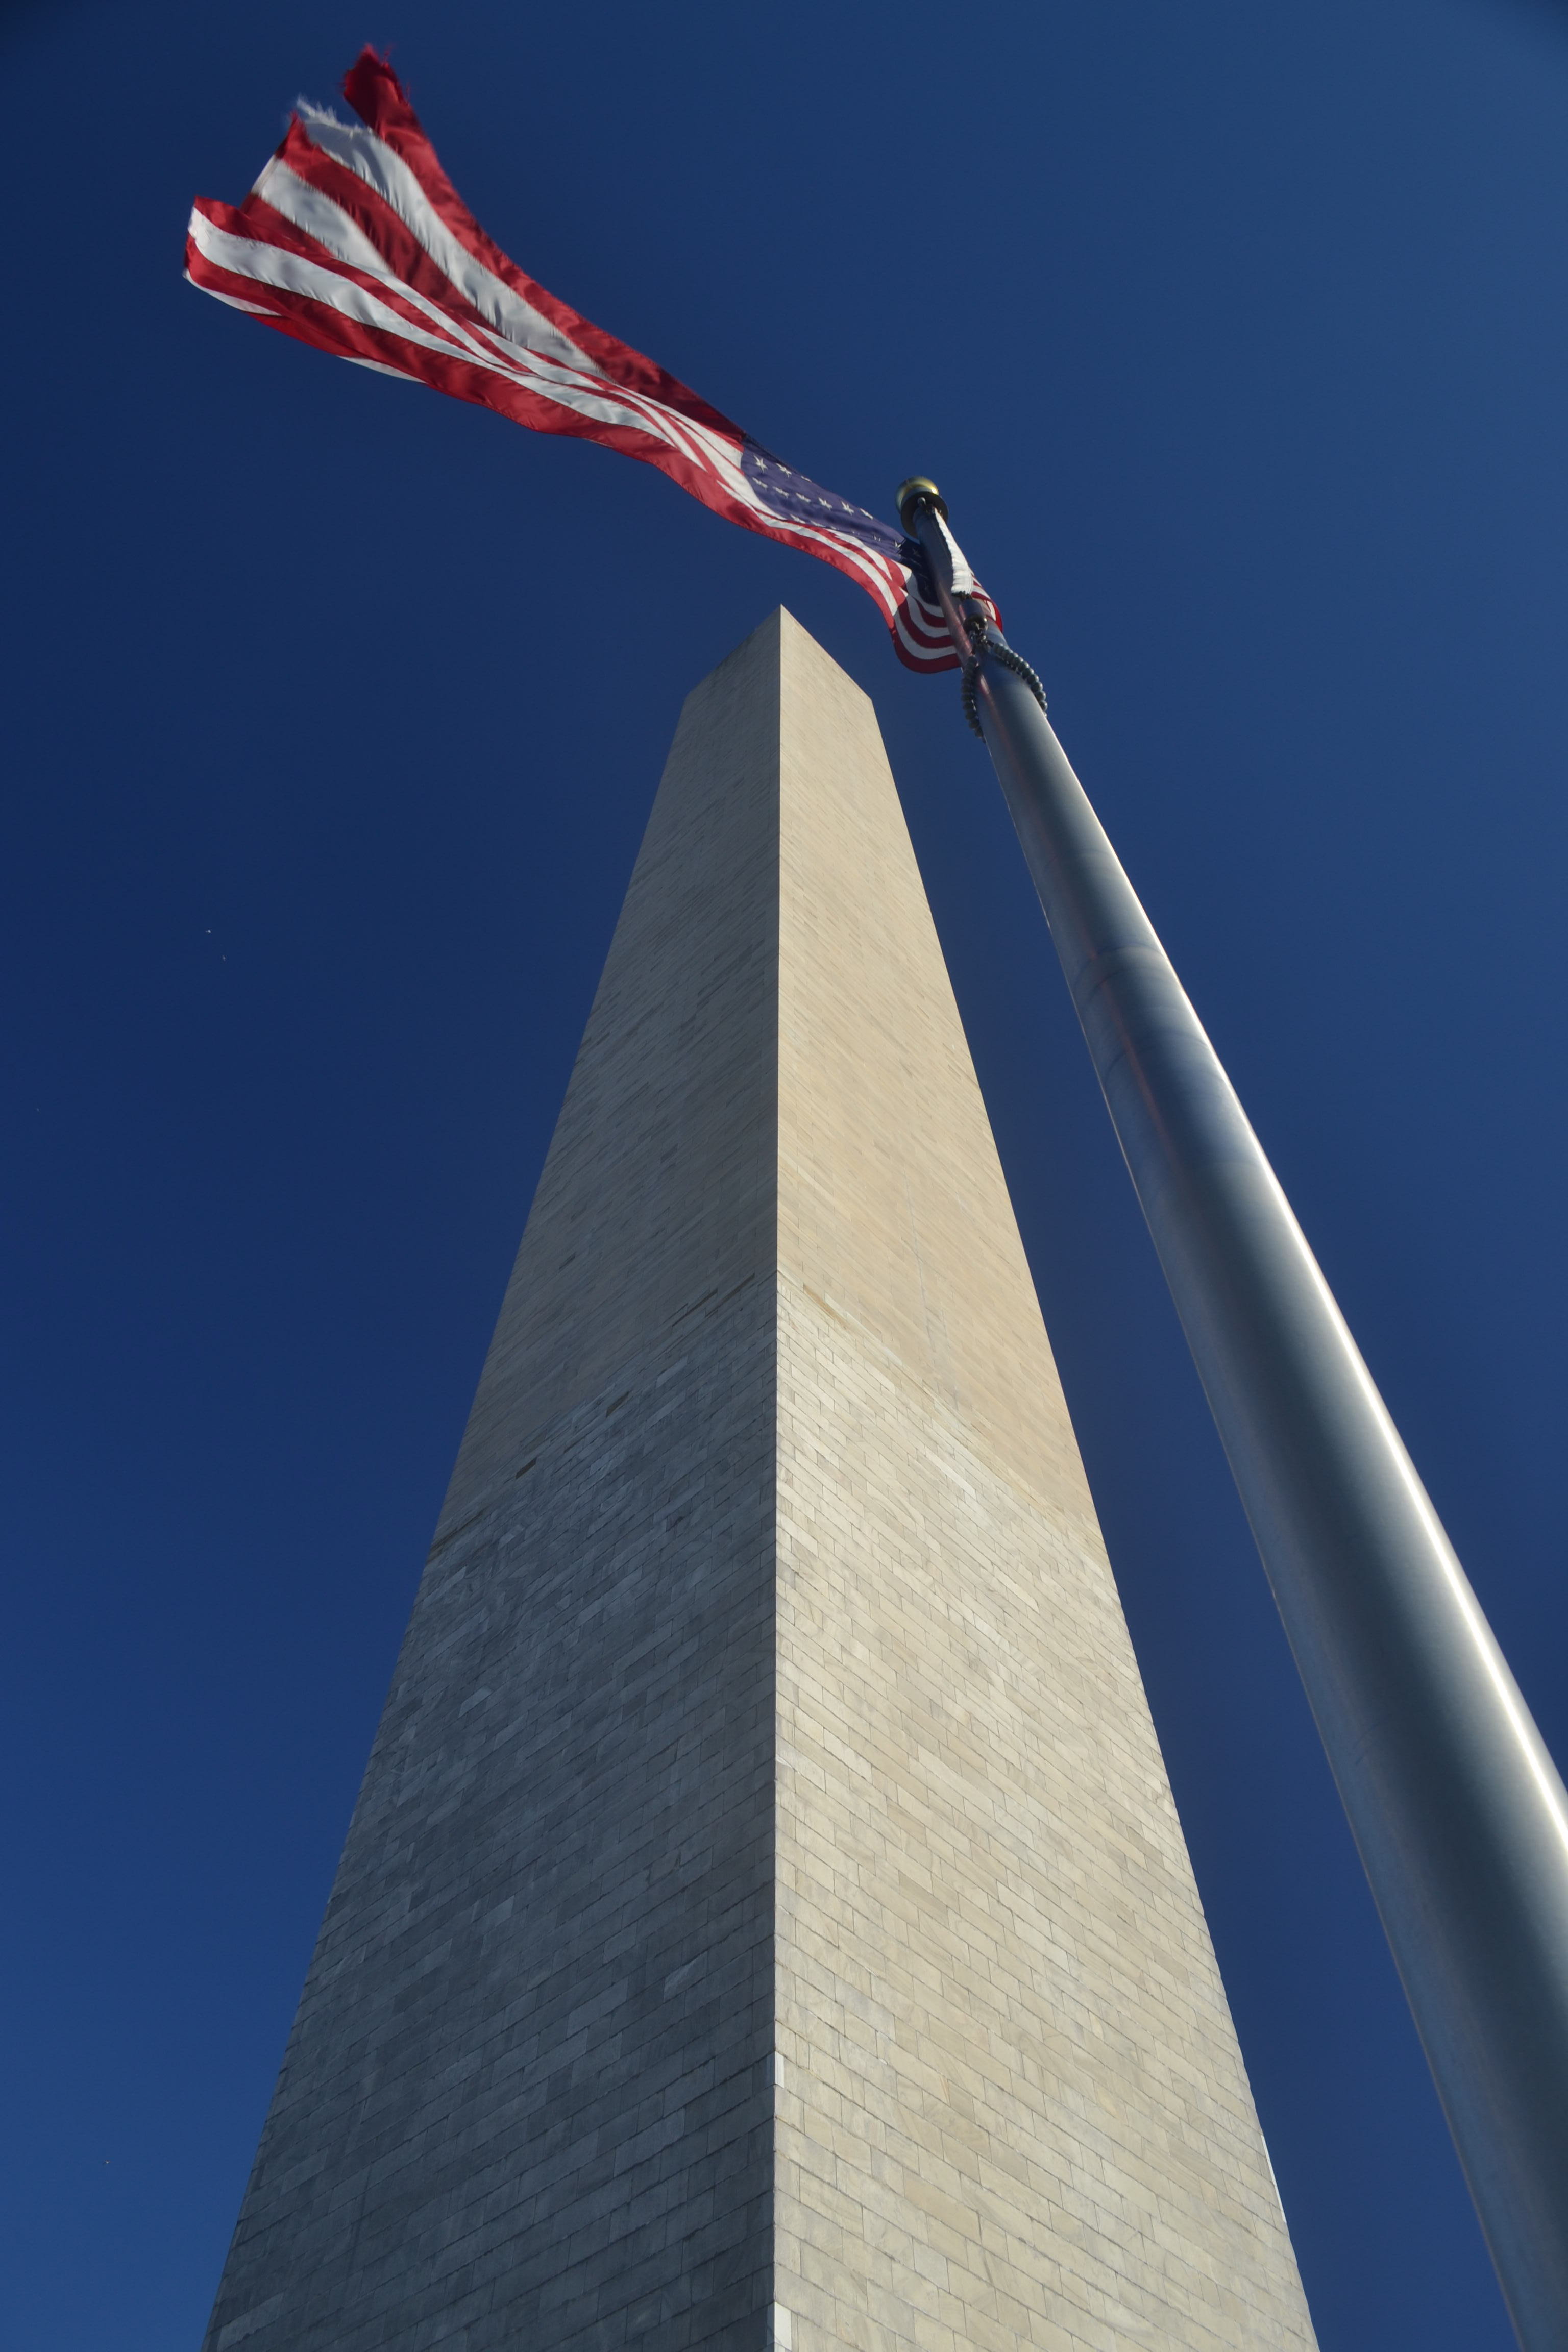 Looking up, a flag pole seems to parallel the Washington Monument so that an American flag flies above it.